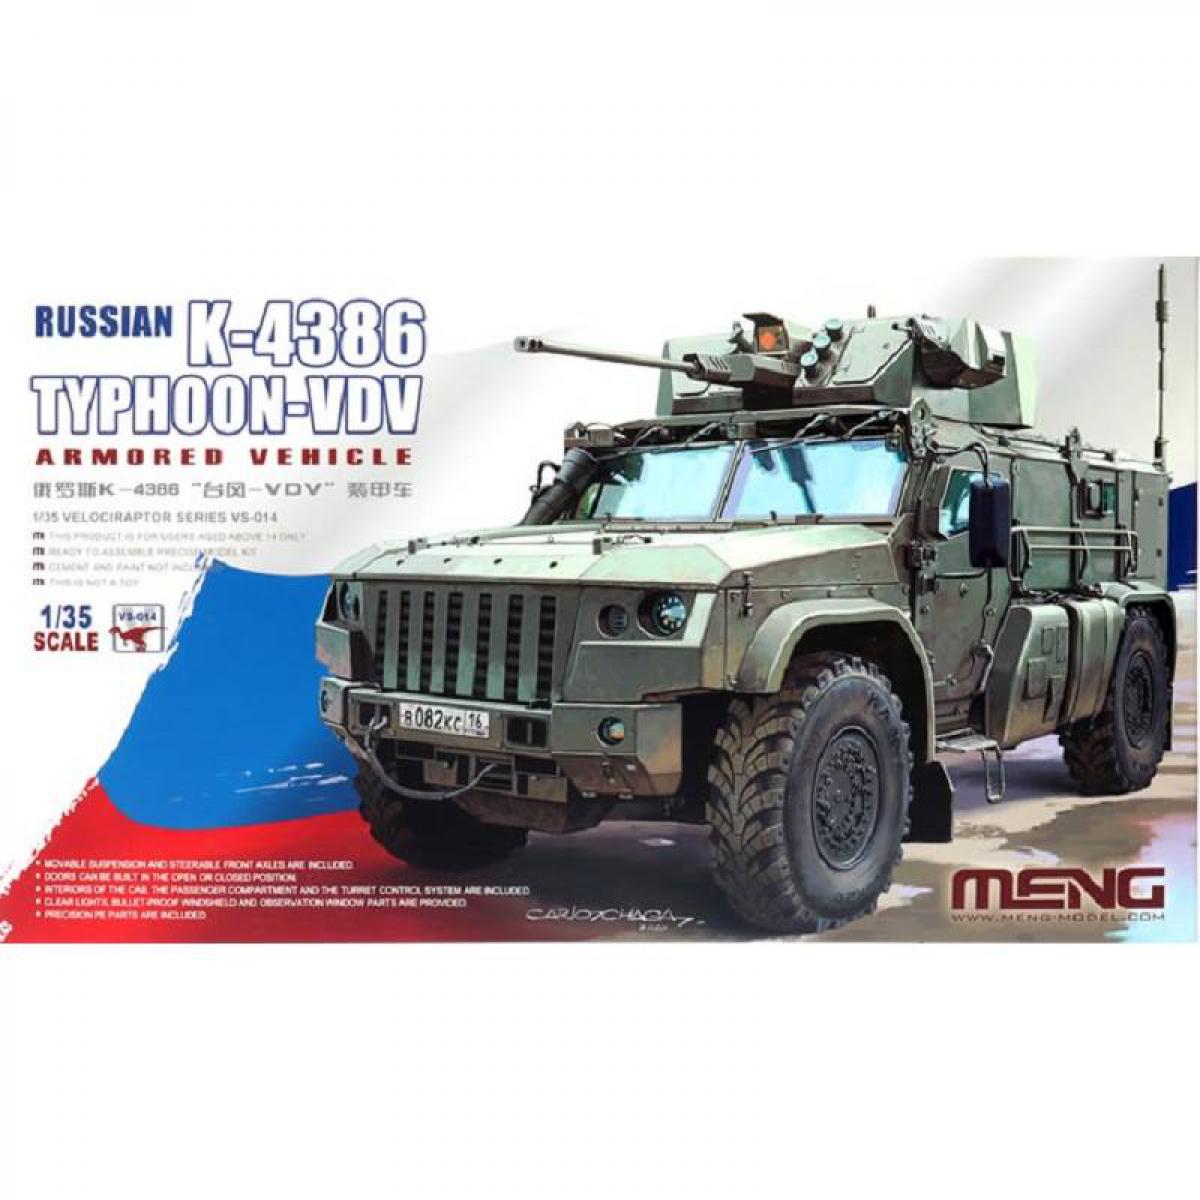 Meng - Maquette Voiture Maquette Camion Russian K-4386 Typhoon-vdv Armored Vehicle - Voitures